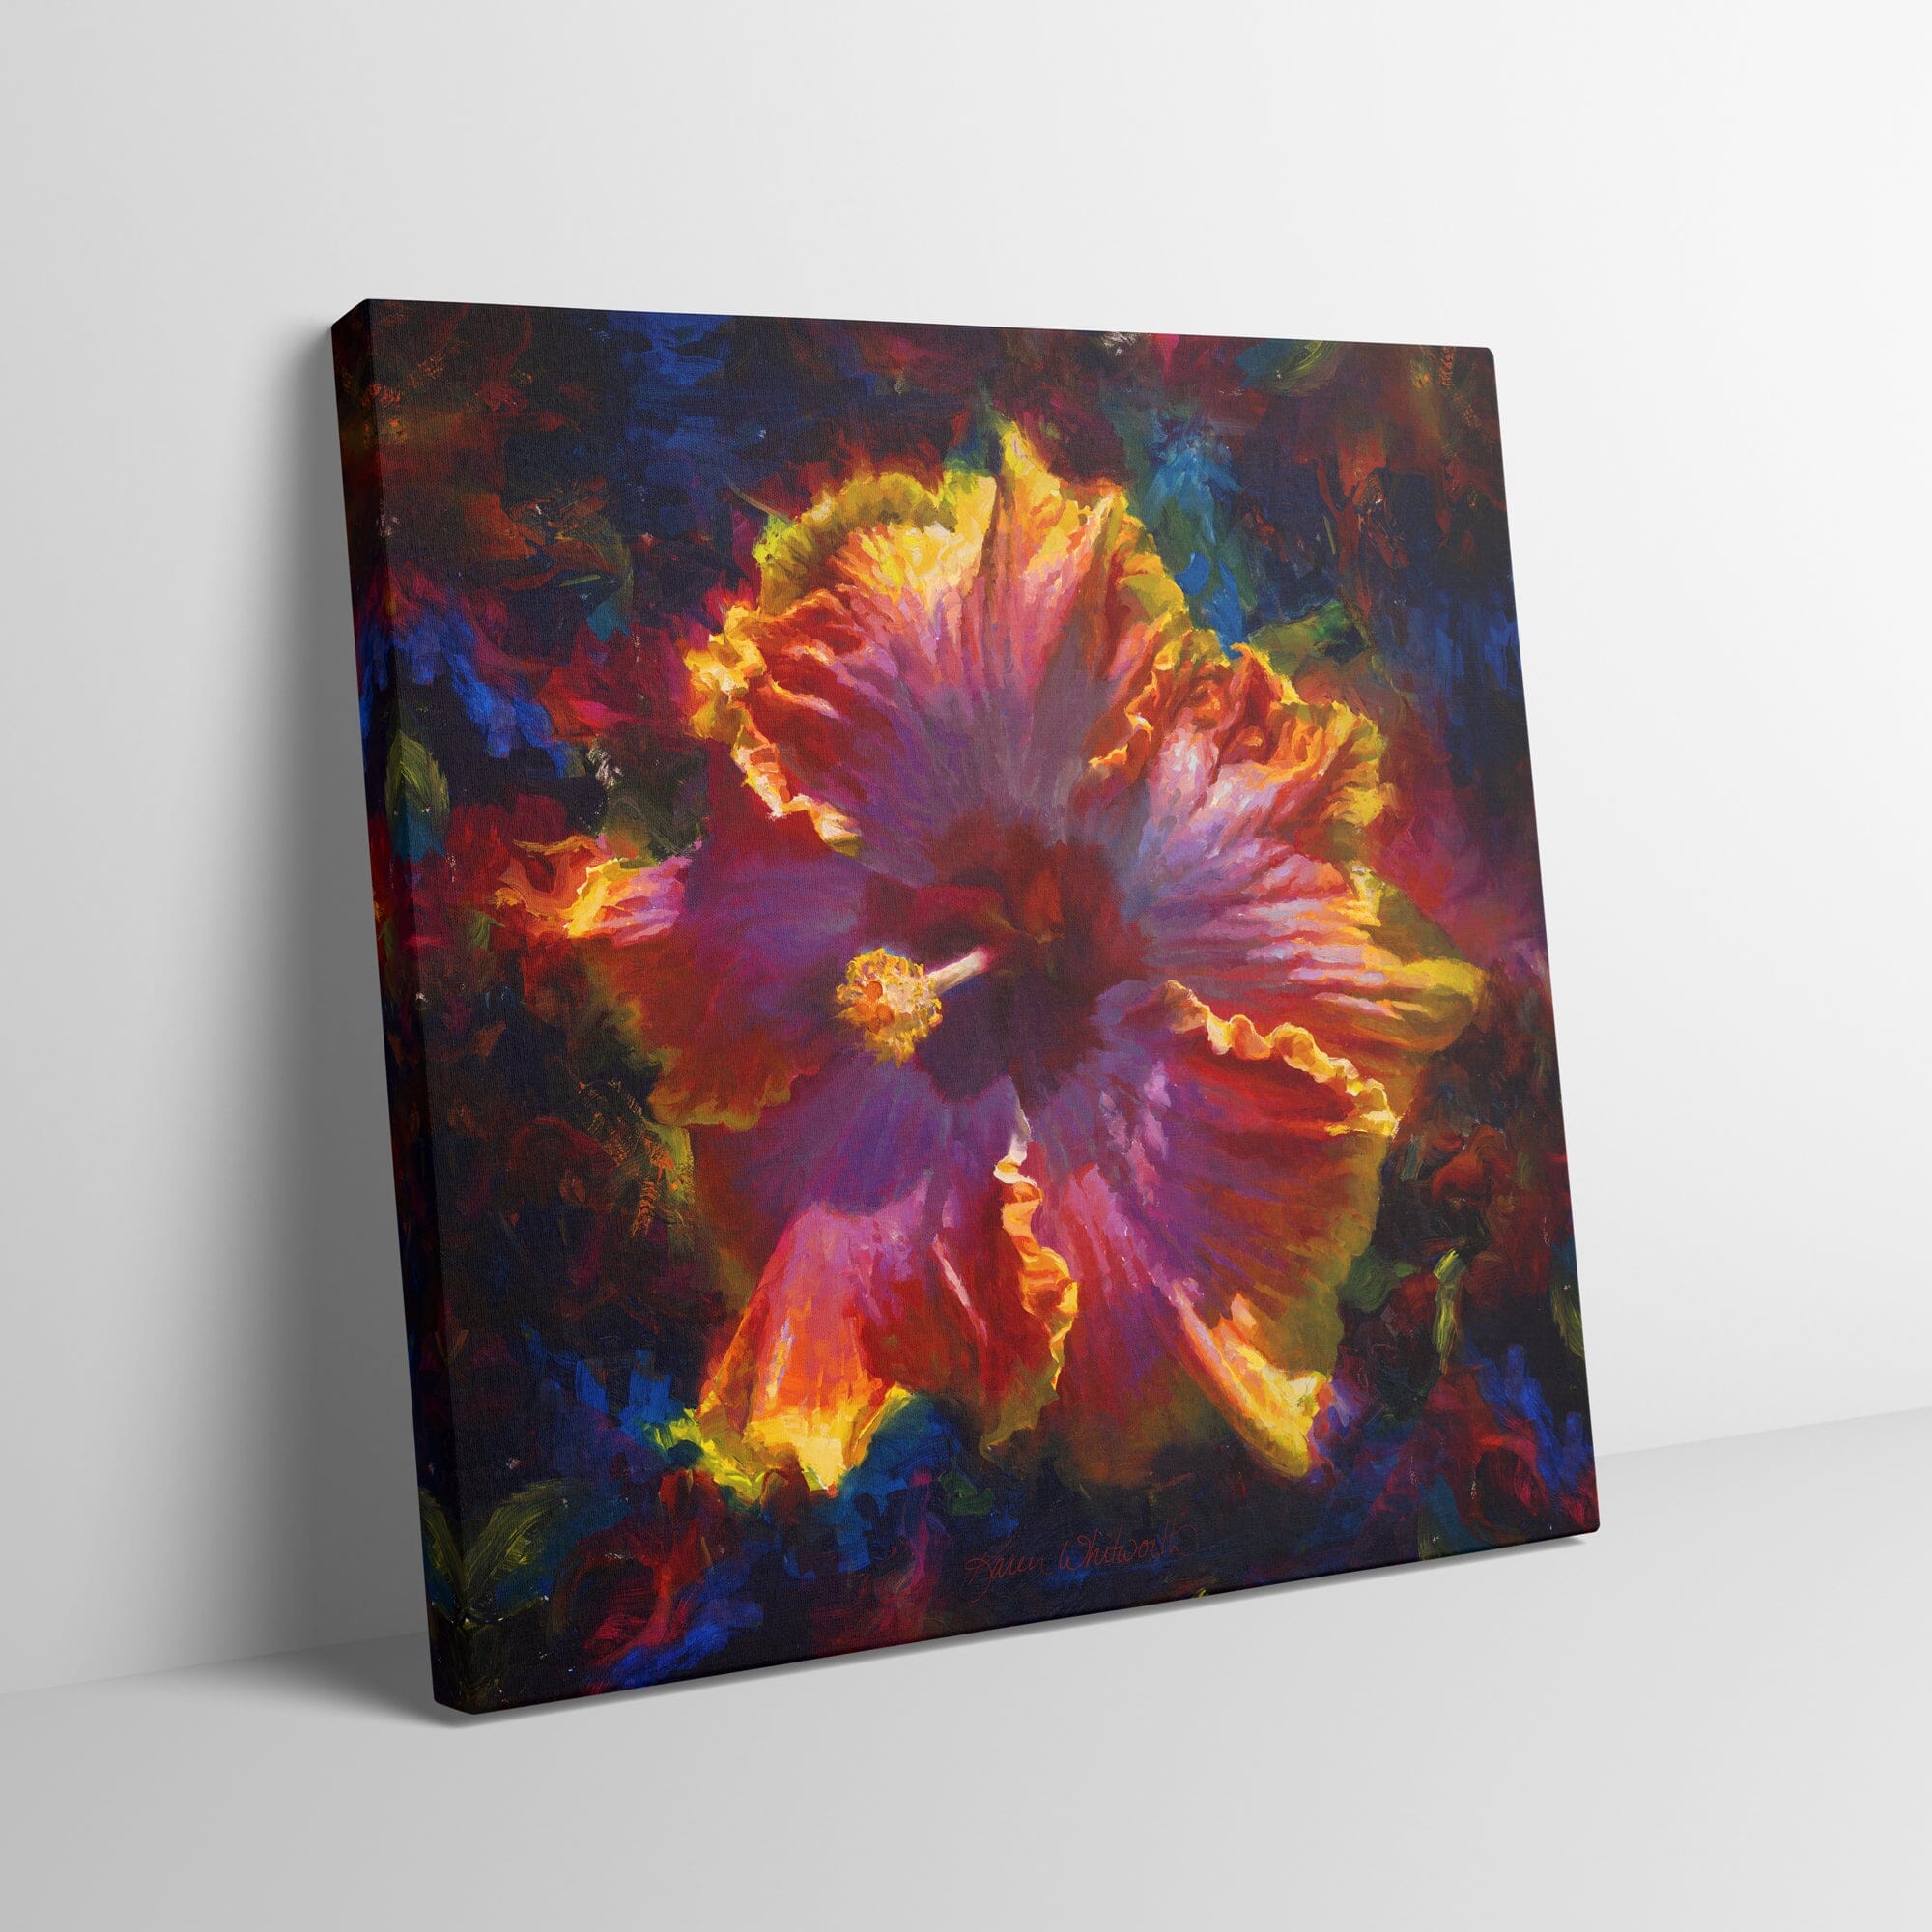 Bright colorful and abstract 12x12 canvas can be - Depop